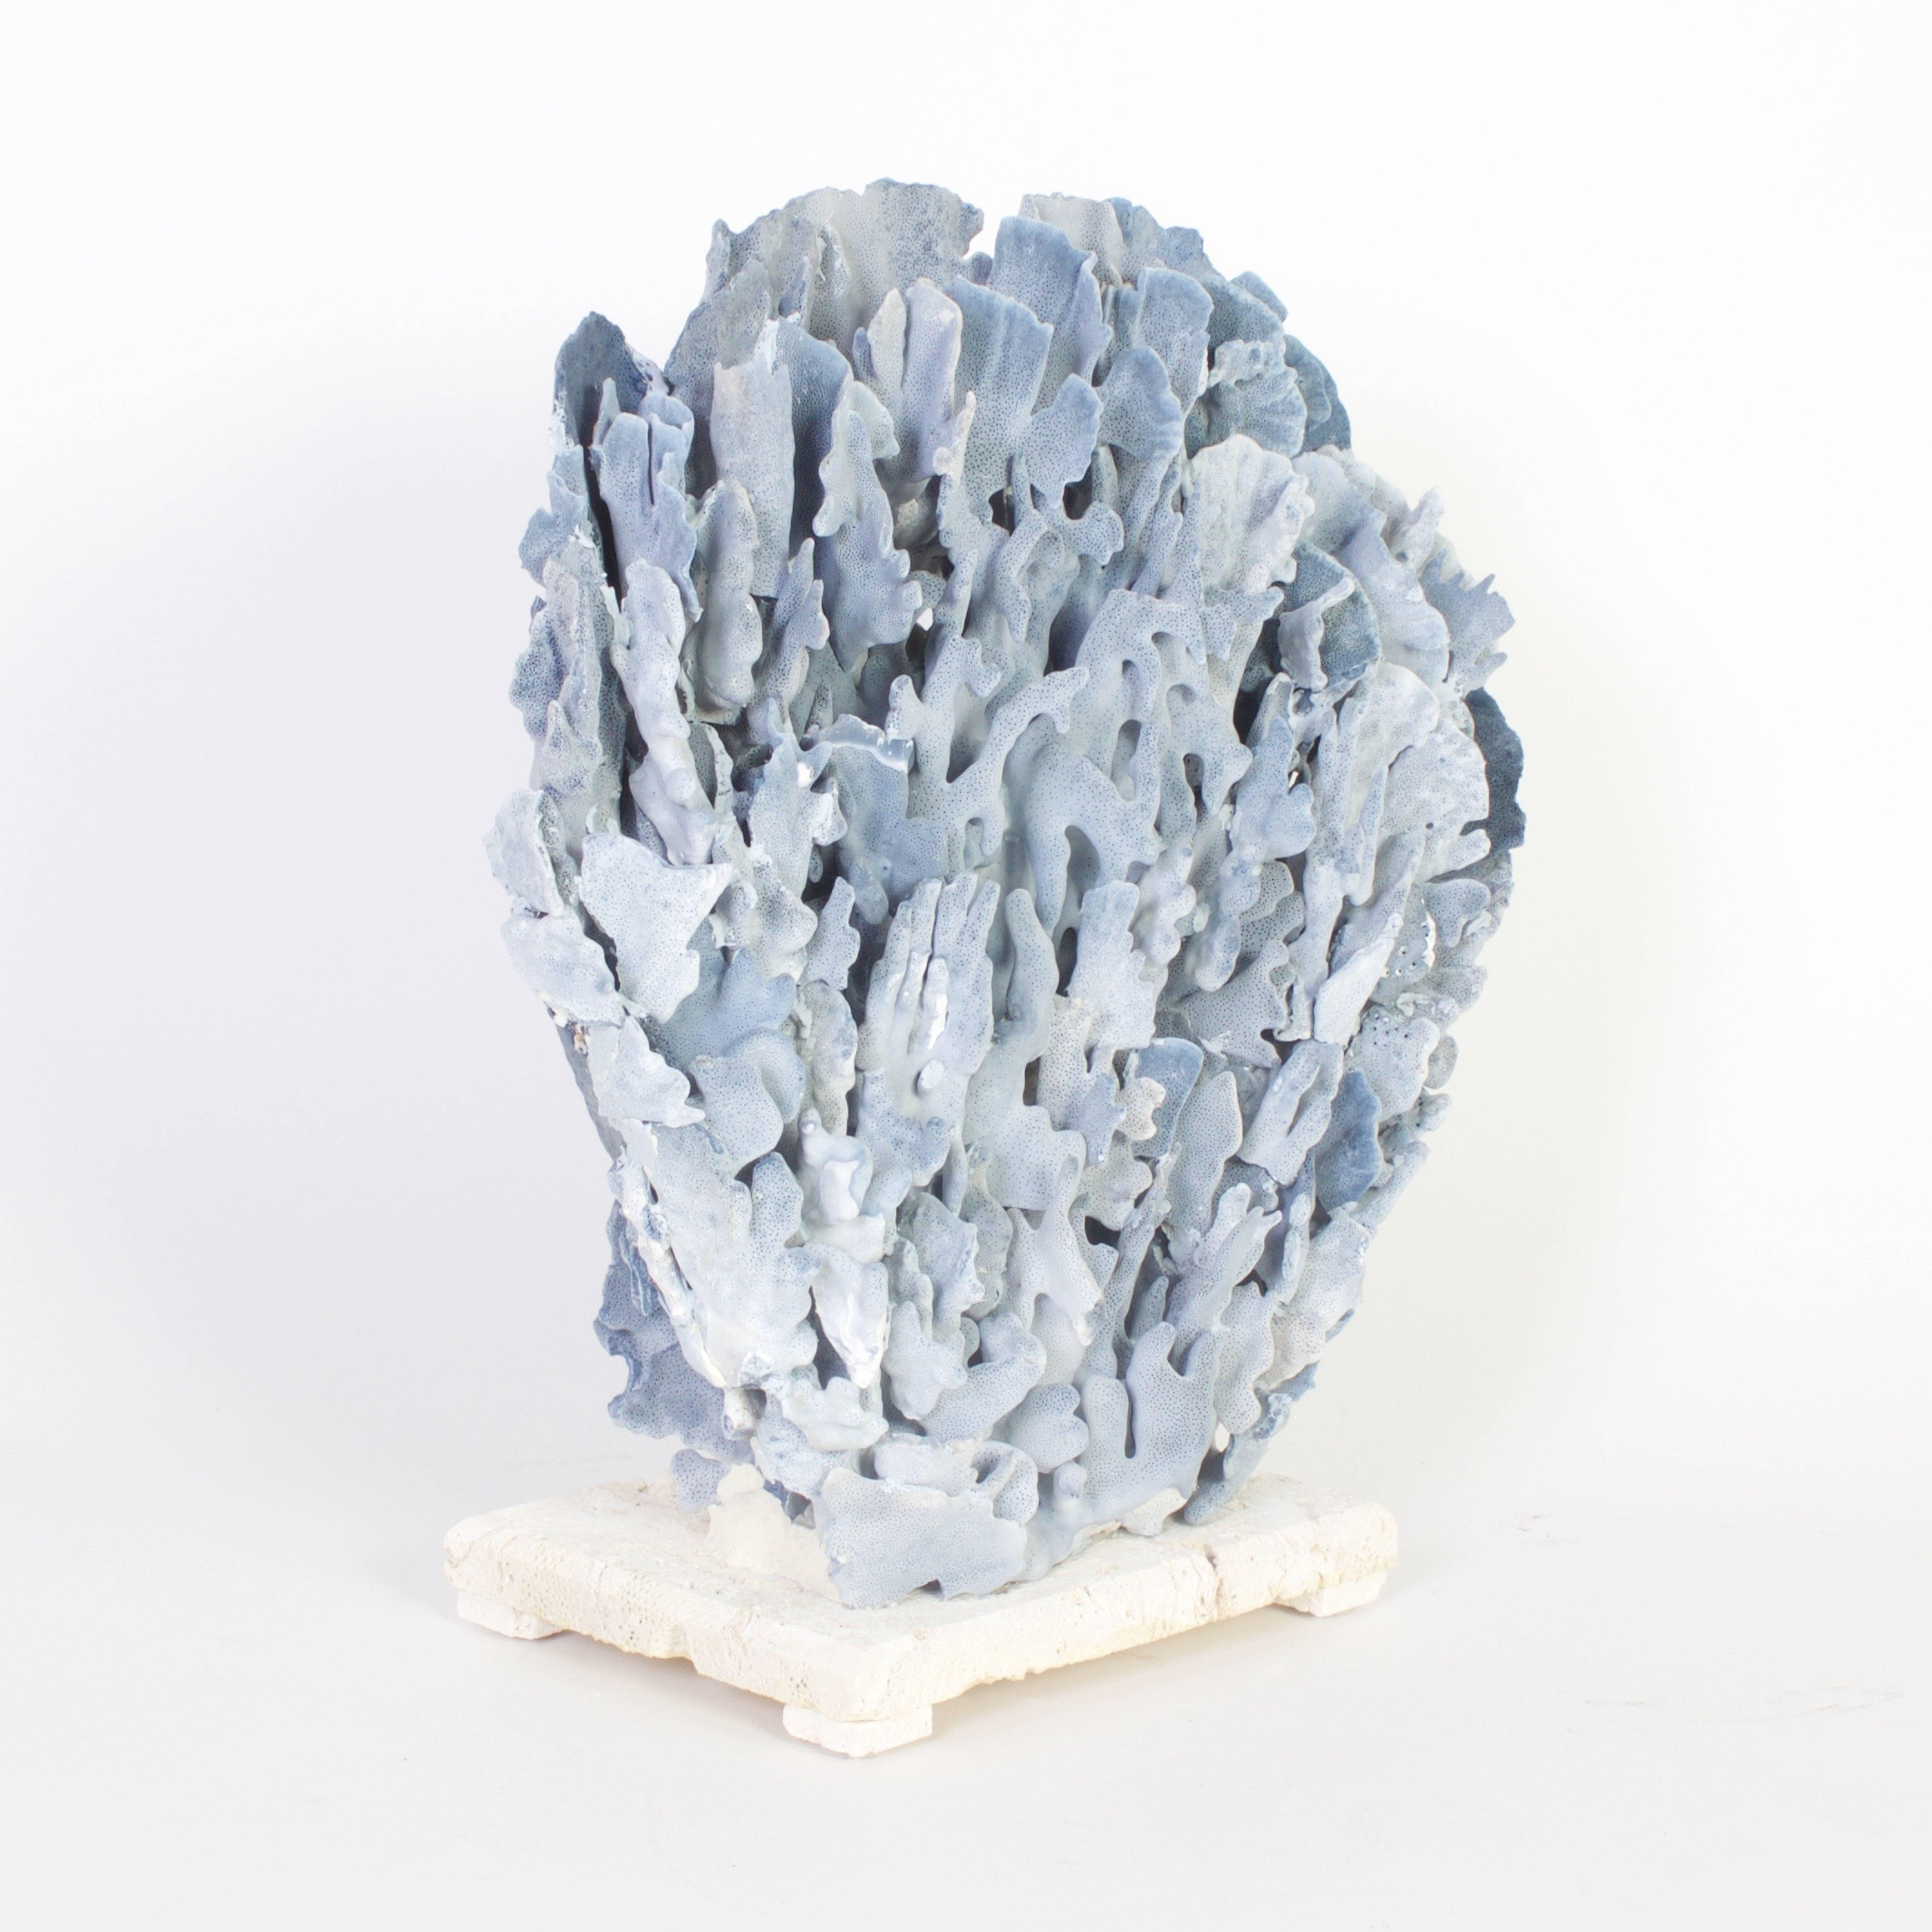 Large and impressive blue coral sculpture designed and manufactured by F. S. Henemader using authentic, legally imported coral. This assemblage is presented on coquina stone. Mysterious and textural, bringing a piece of Mother Nature's grand design